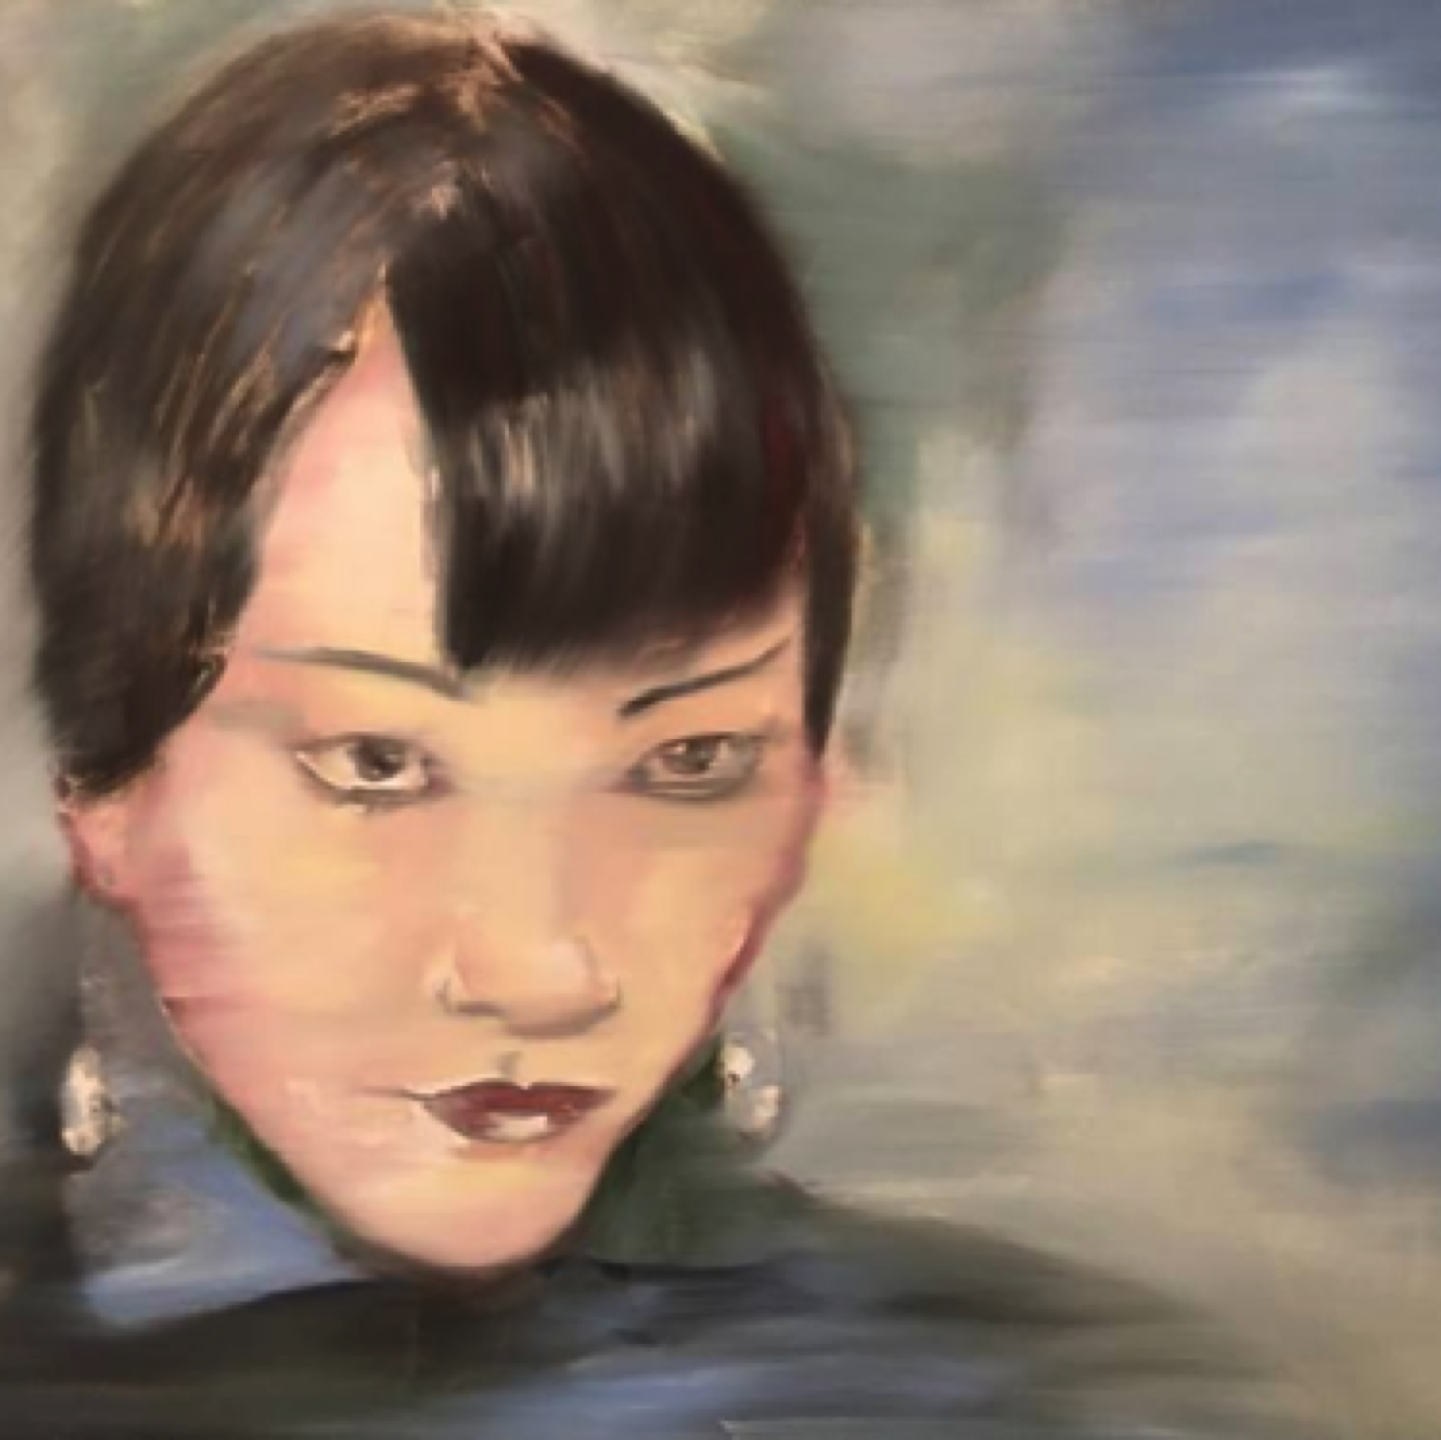 Gregg Chadwick
Anna May Wong
36"x48"oil on linen 2015
Ailsa Chang Collection, Culver City, California
Sold by Saatchi Art - June,2020